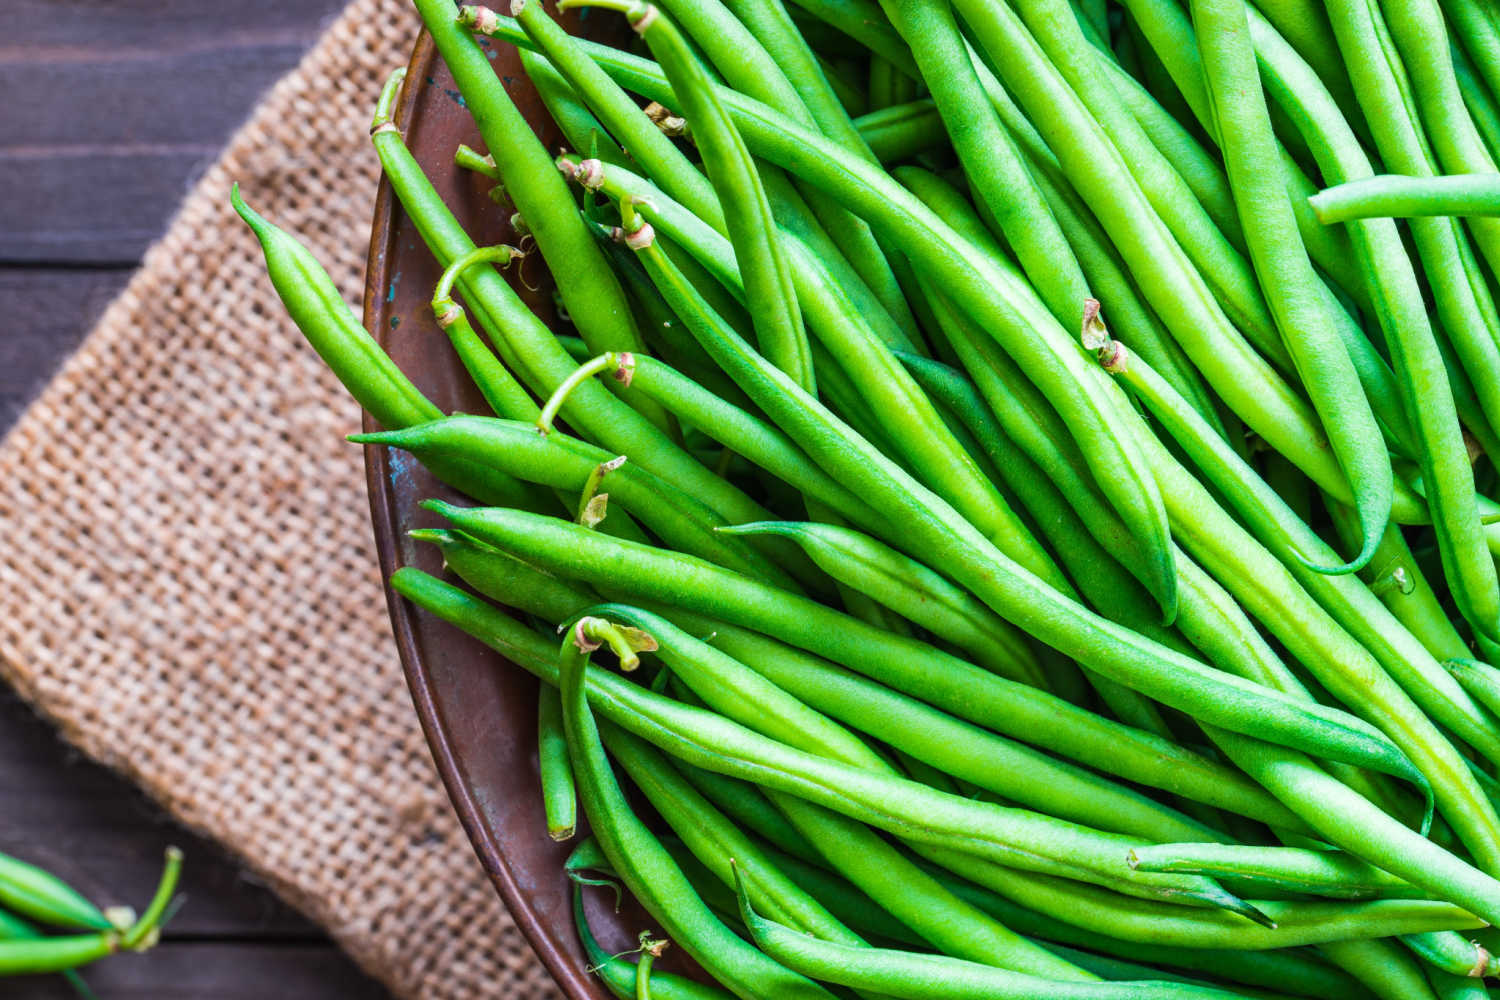 Green Beans For Babies – When to Introduce, Benefits and Precautions